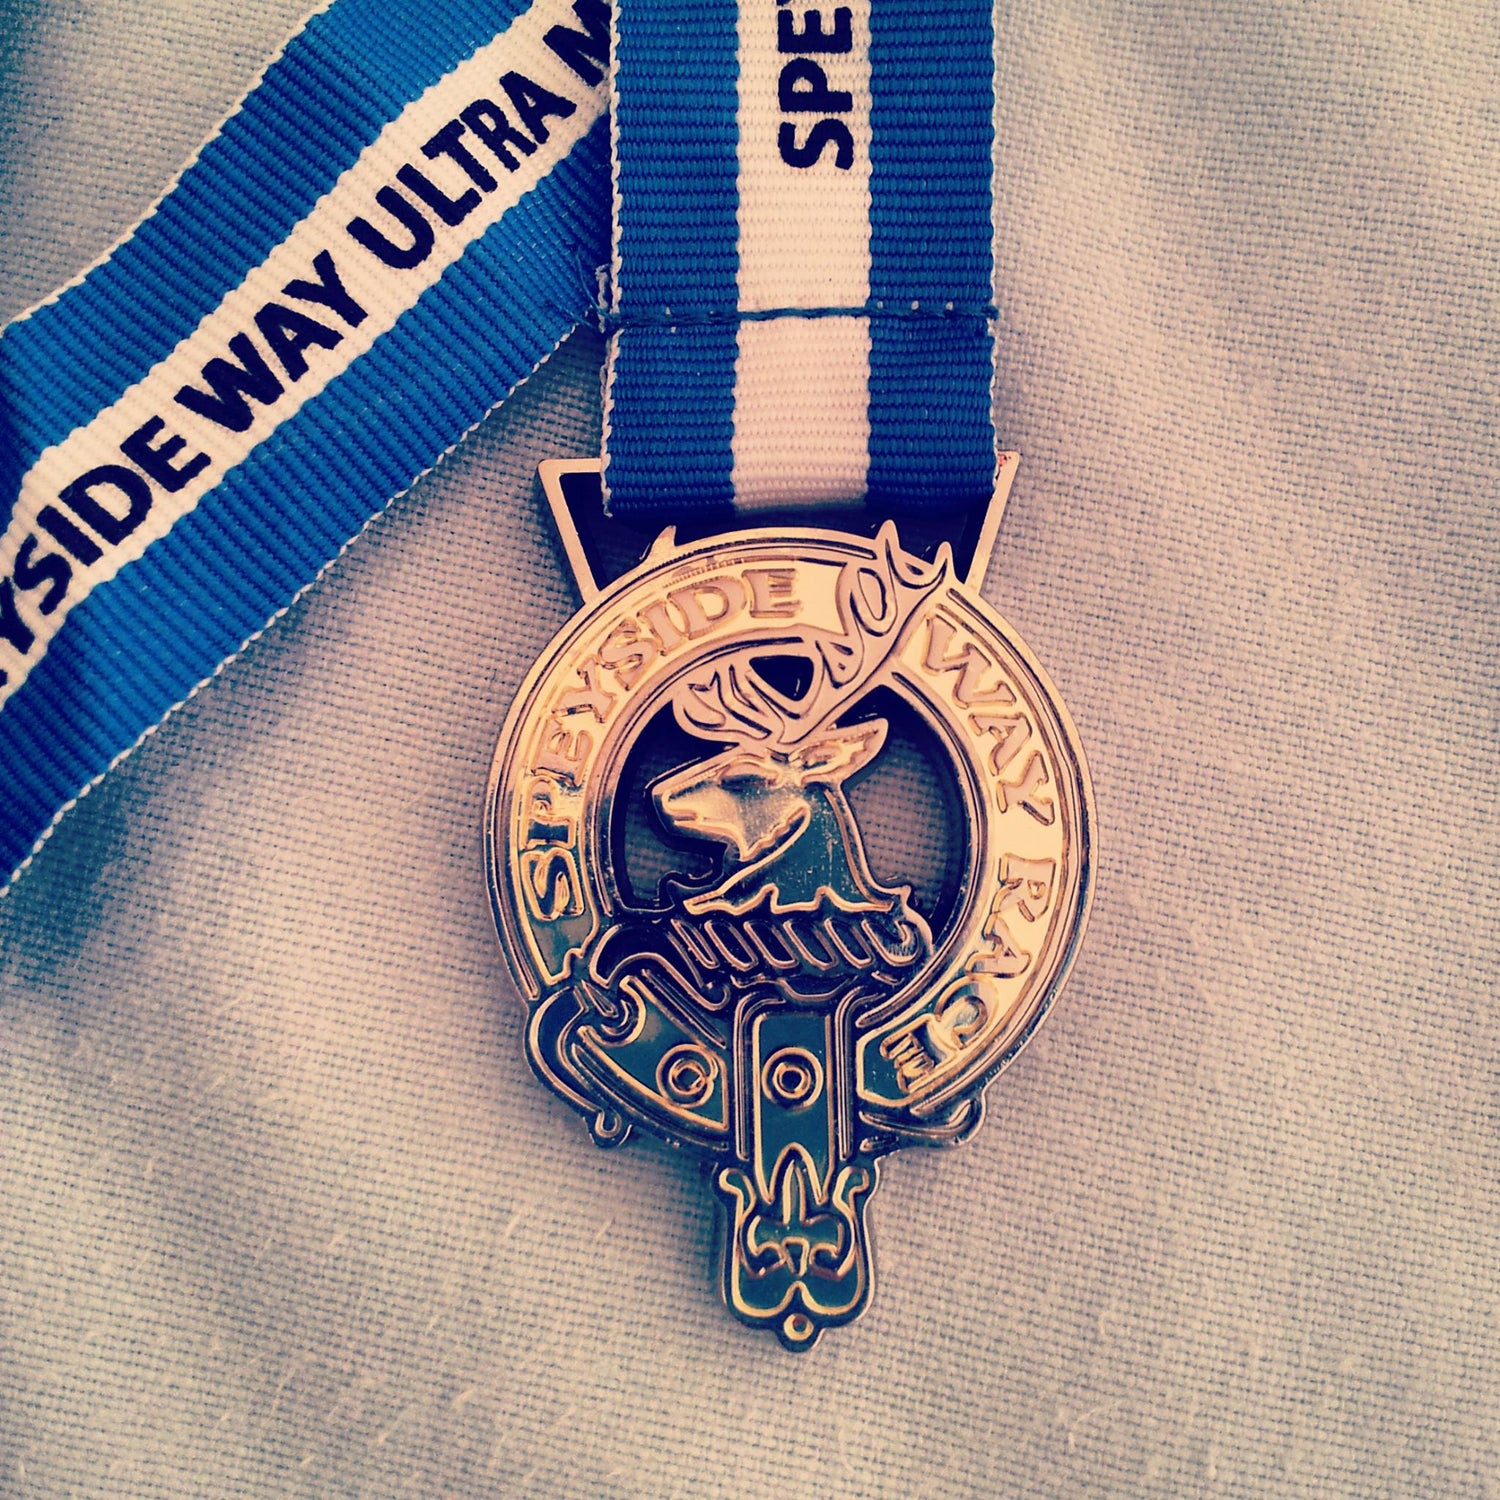 Williams: 36.5 miles. Simple. Chunky. Nice. A race nestled in beautiful scenery with a suitably “traily” medal.